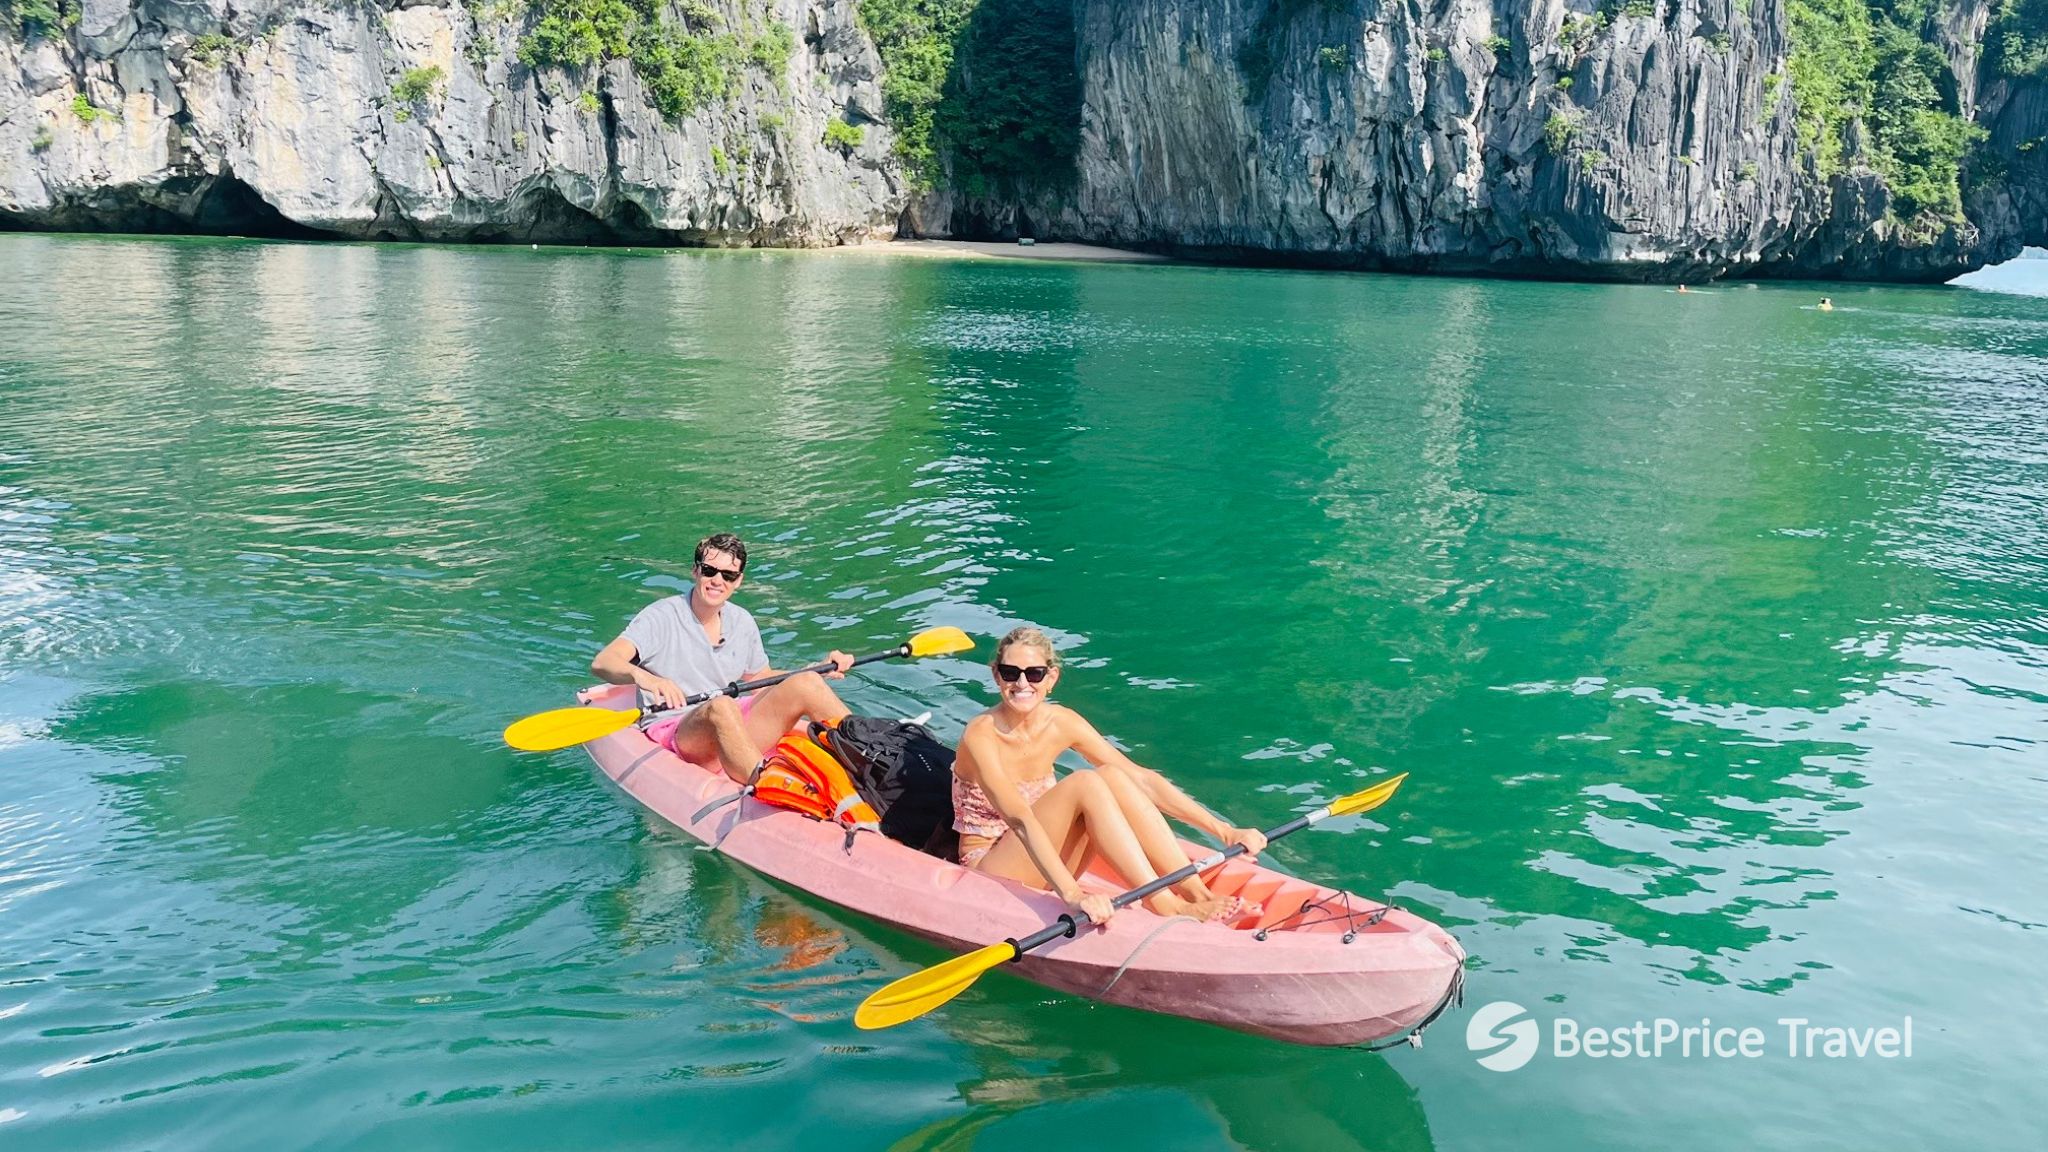 Day 3 Admire The Stunning View Of Halong Bay Through A Kayaking Ride